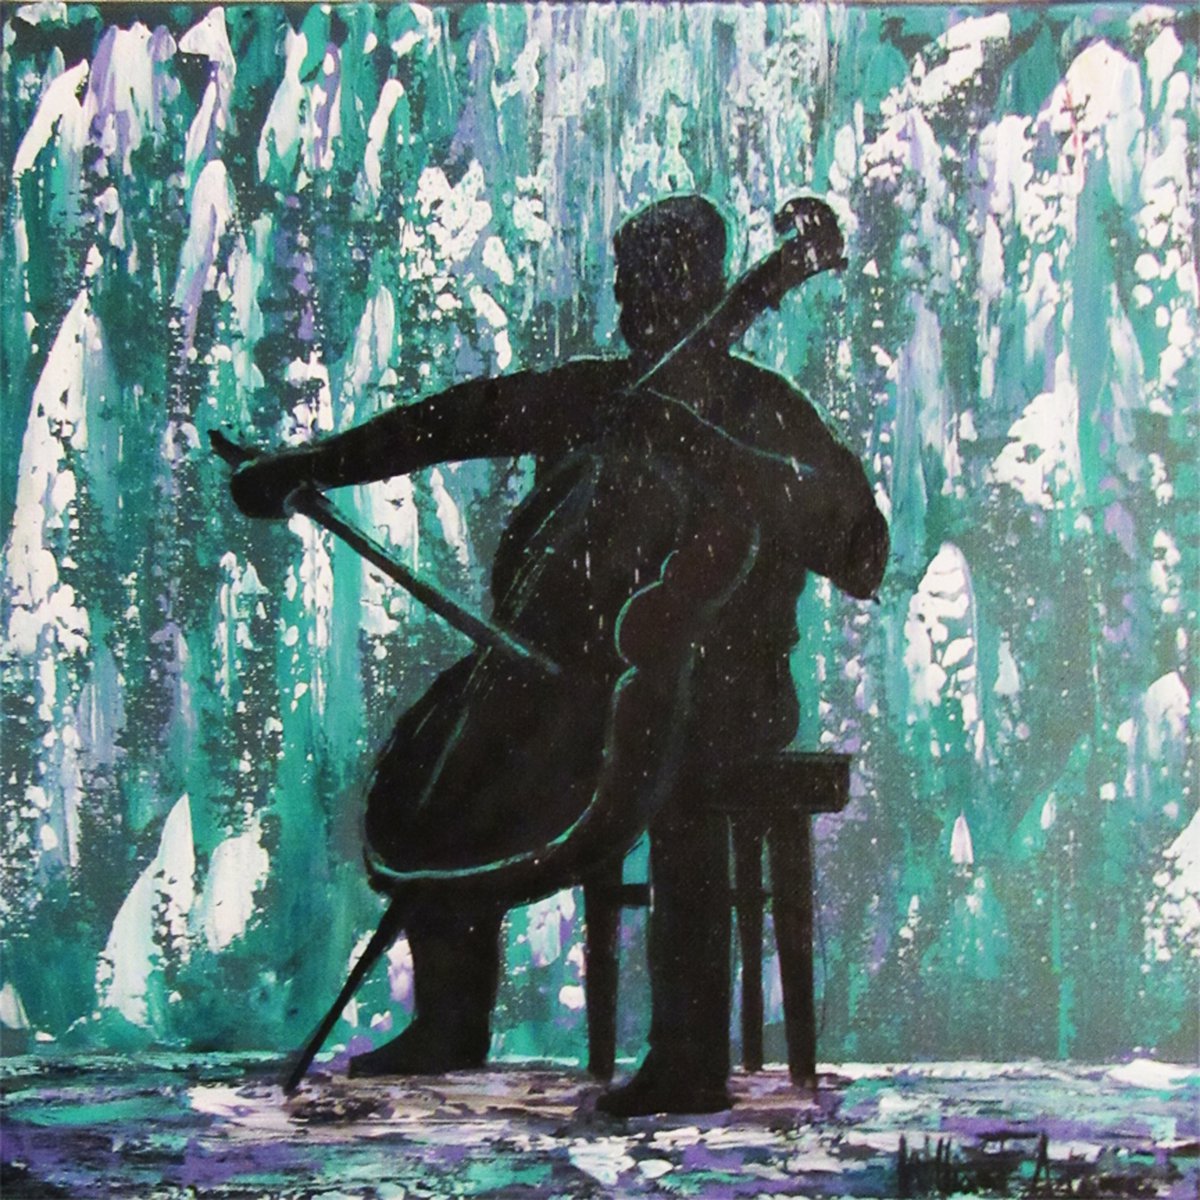 The Melody Rained Down on Me! - Cello by William F. Adams